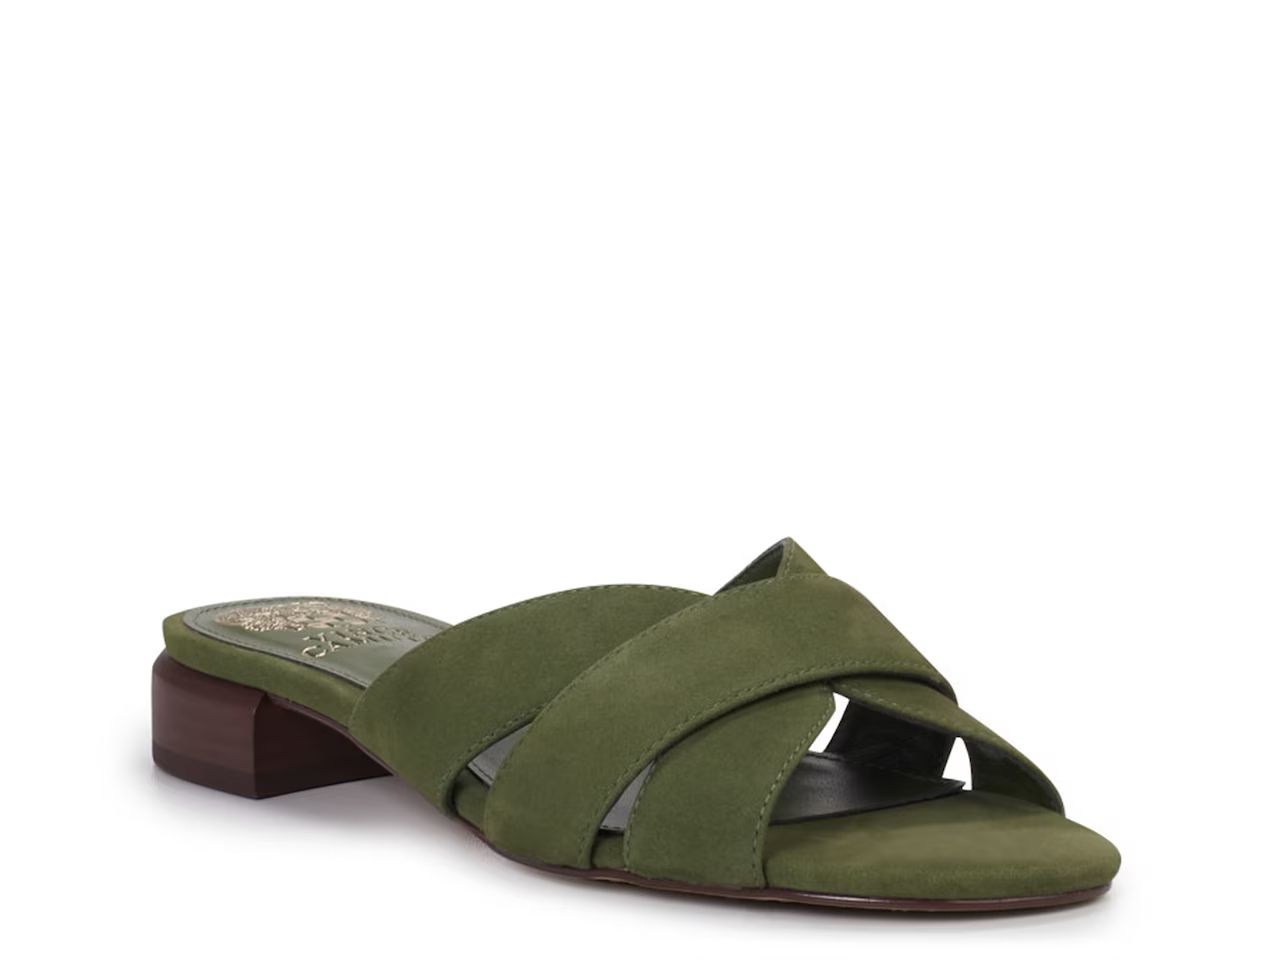 Vince Camuto Maydree Sandal | DSW